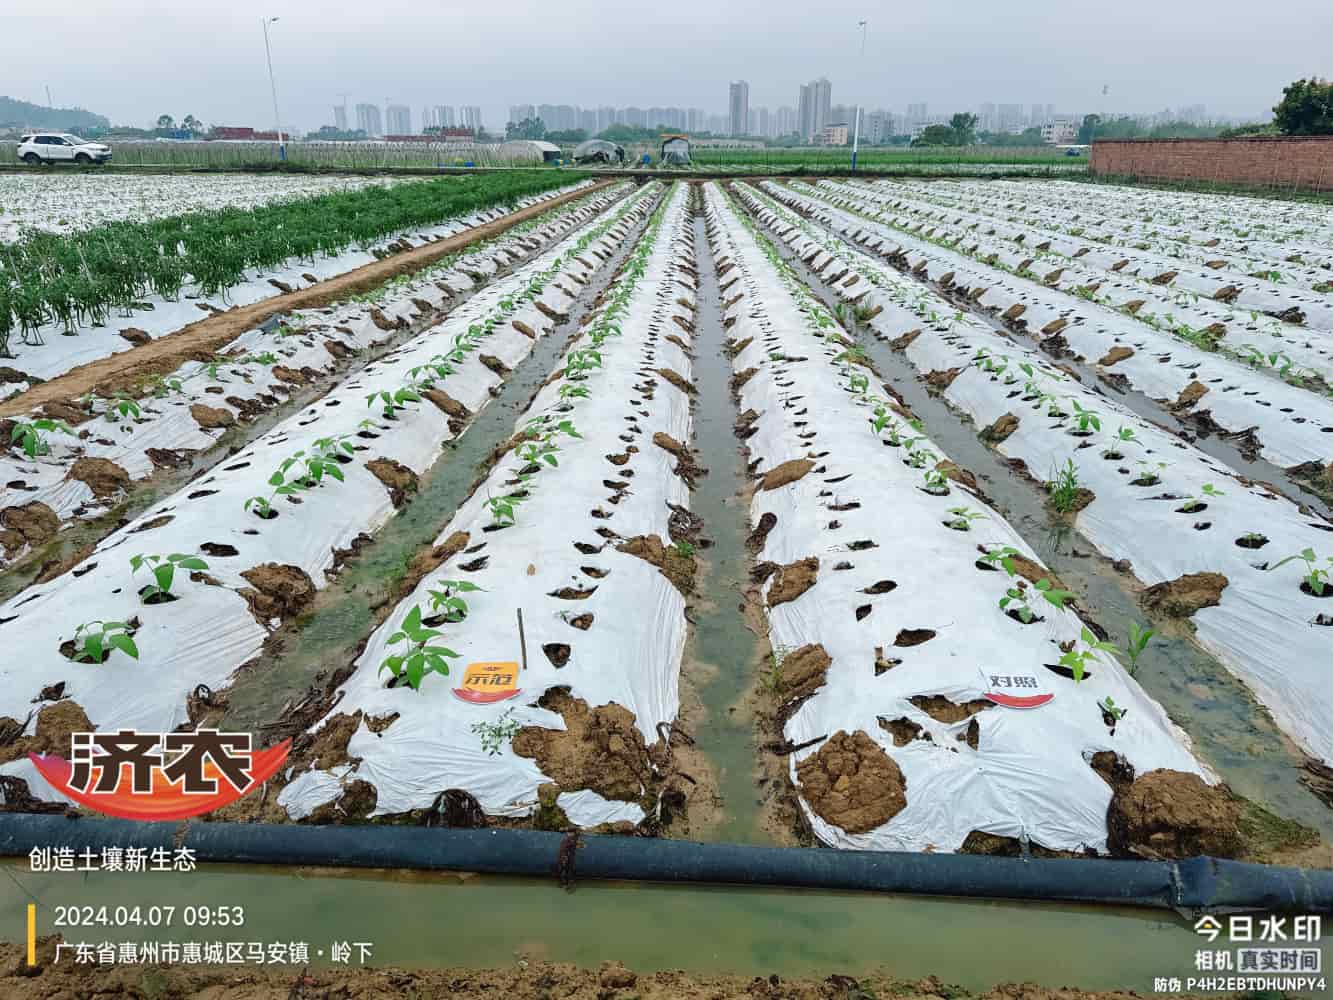 The effect of using agricultural products in Guangdong beans(图1)